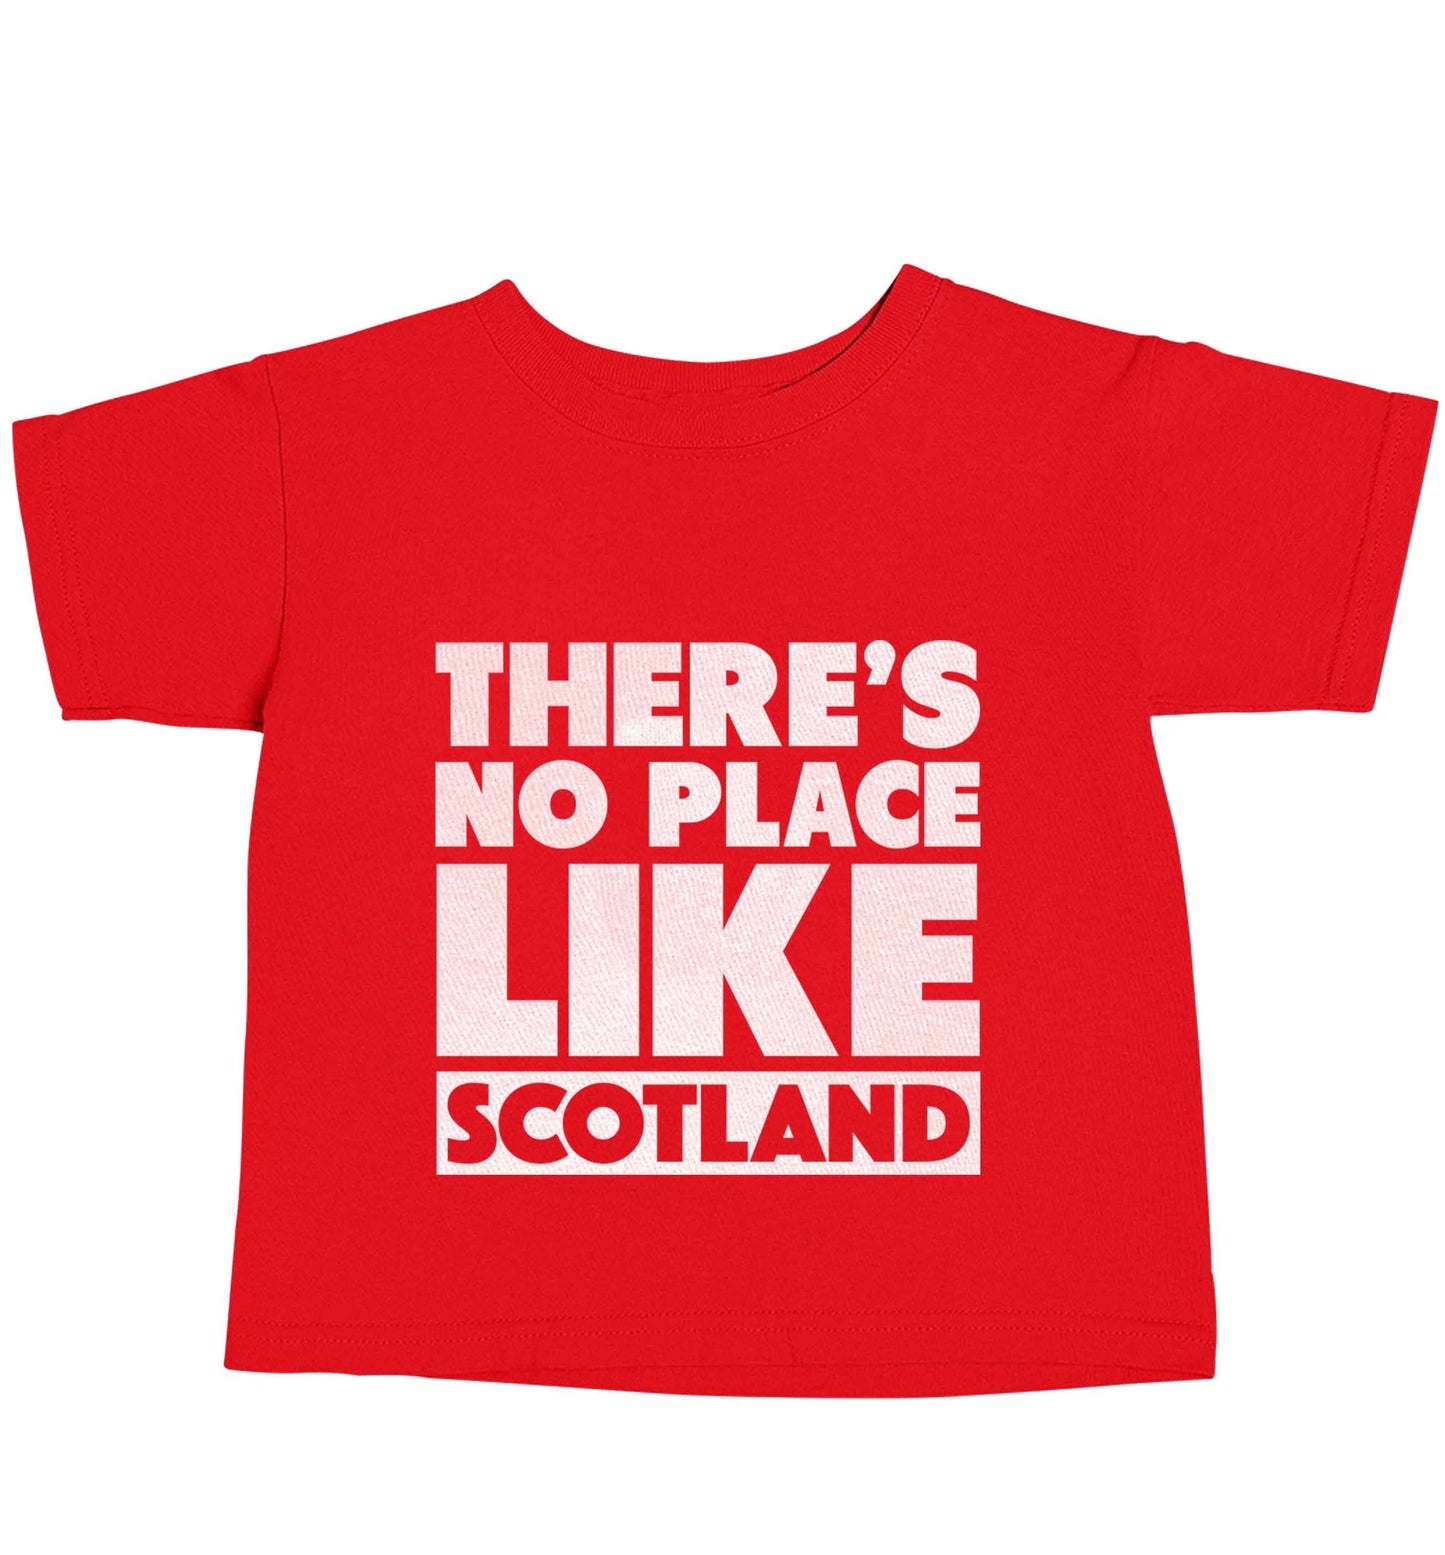 There's no place like Scotland red baby toddler Tshirt 2 Years